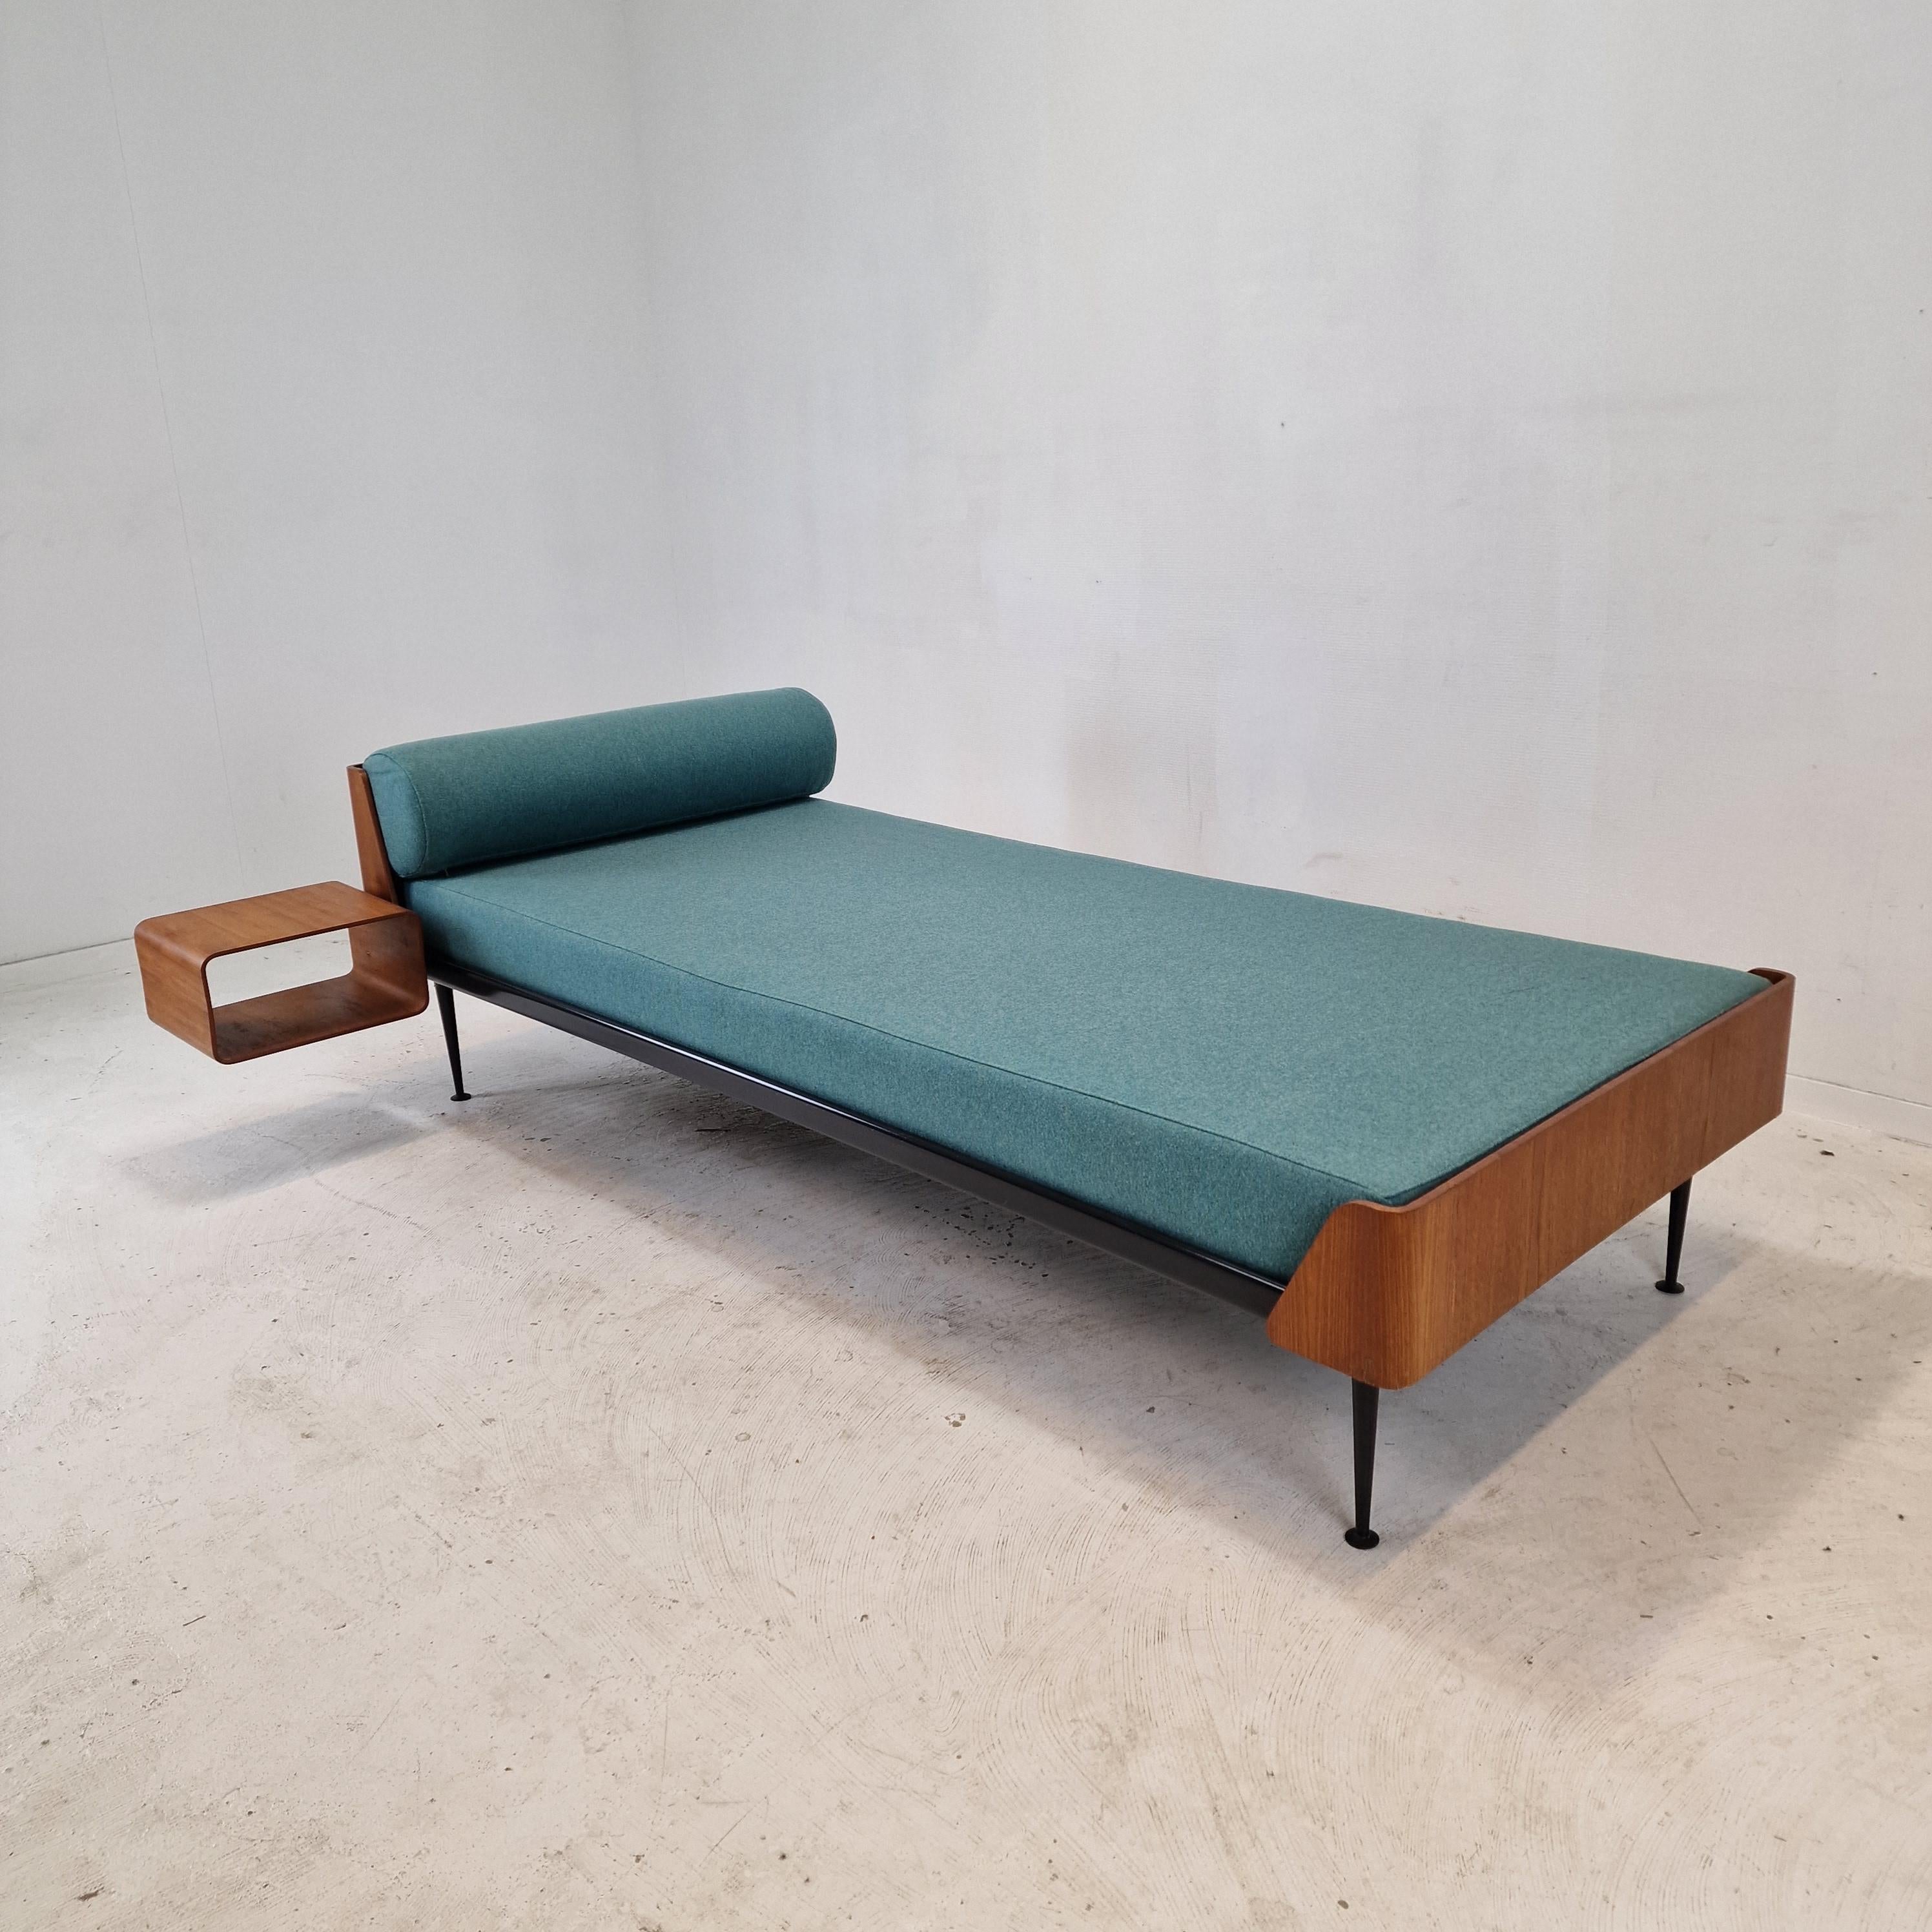 Woven Friso Kramer ‘Euroika’ daybed for Auping Holland, 1960's For Sale